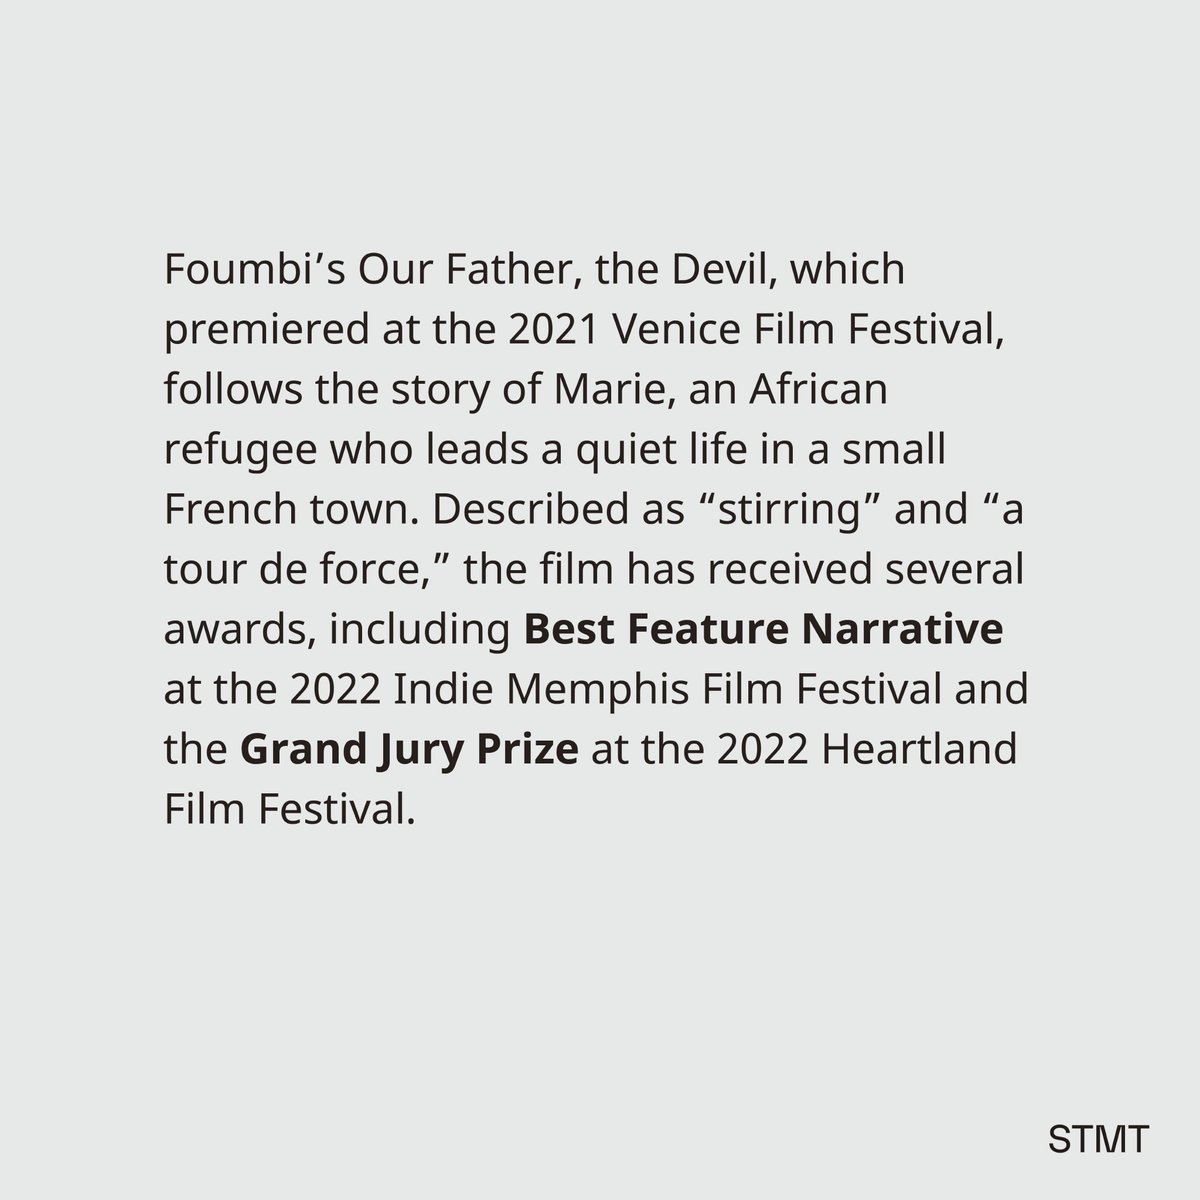 Our Father, the Devil asks – is repentance possible? Director, @EllieAnette reunites a woman scarred by  tragedy with the man responsible for it. We spoke to Foumbi about filmmaking, the influence of Nollywood on African cinema, and future prospects for Black filmmakers